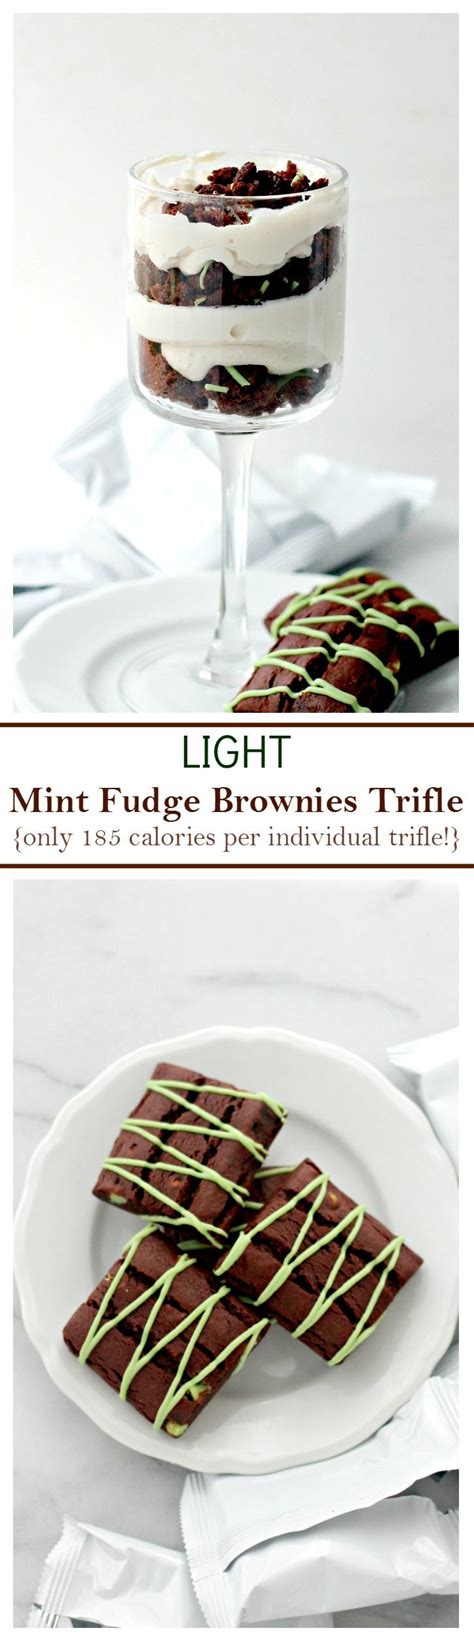 Preparation healthy low calorie desserts. Protein and Fiber-packed low cal dessert with Mint Fudge Brownies and a deliciously smooth ...